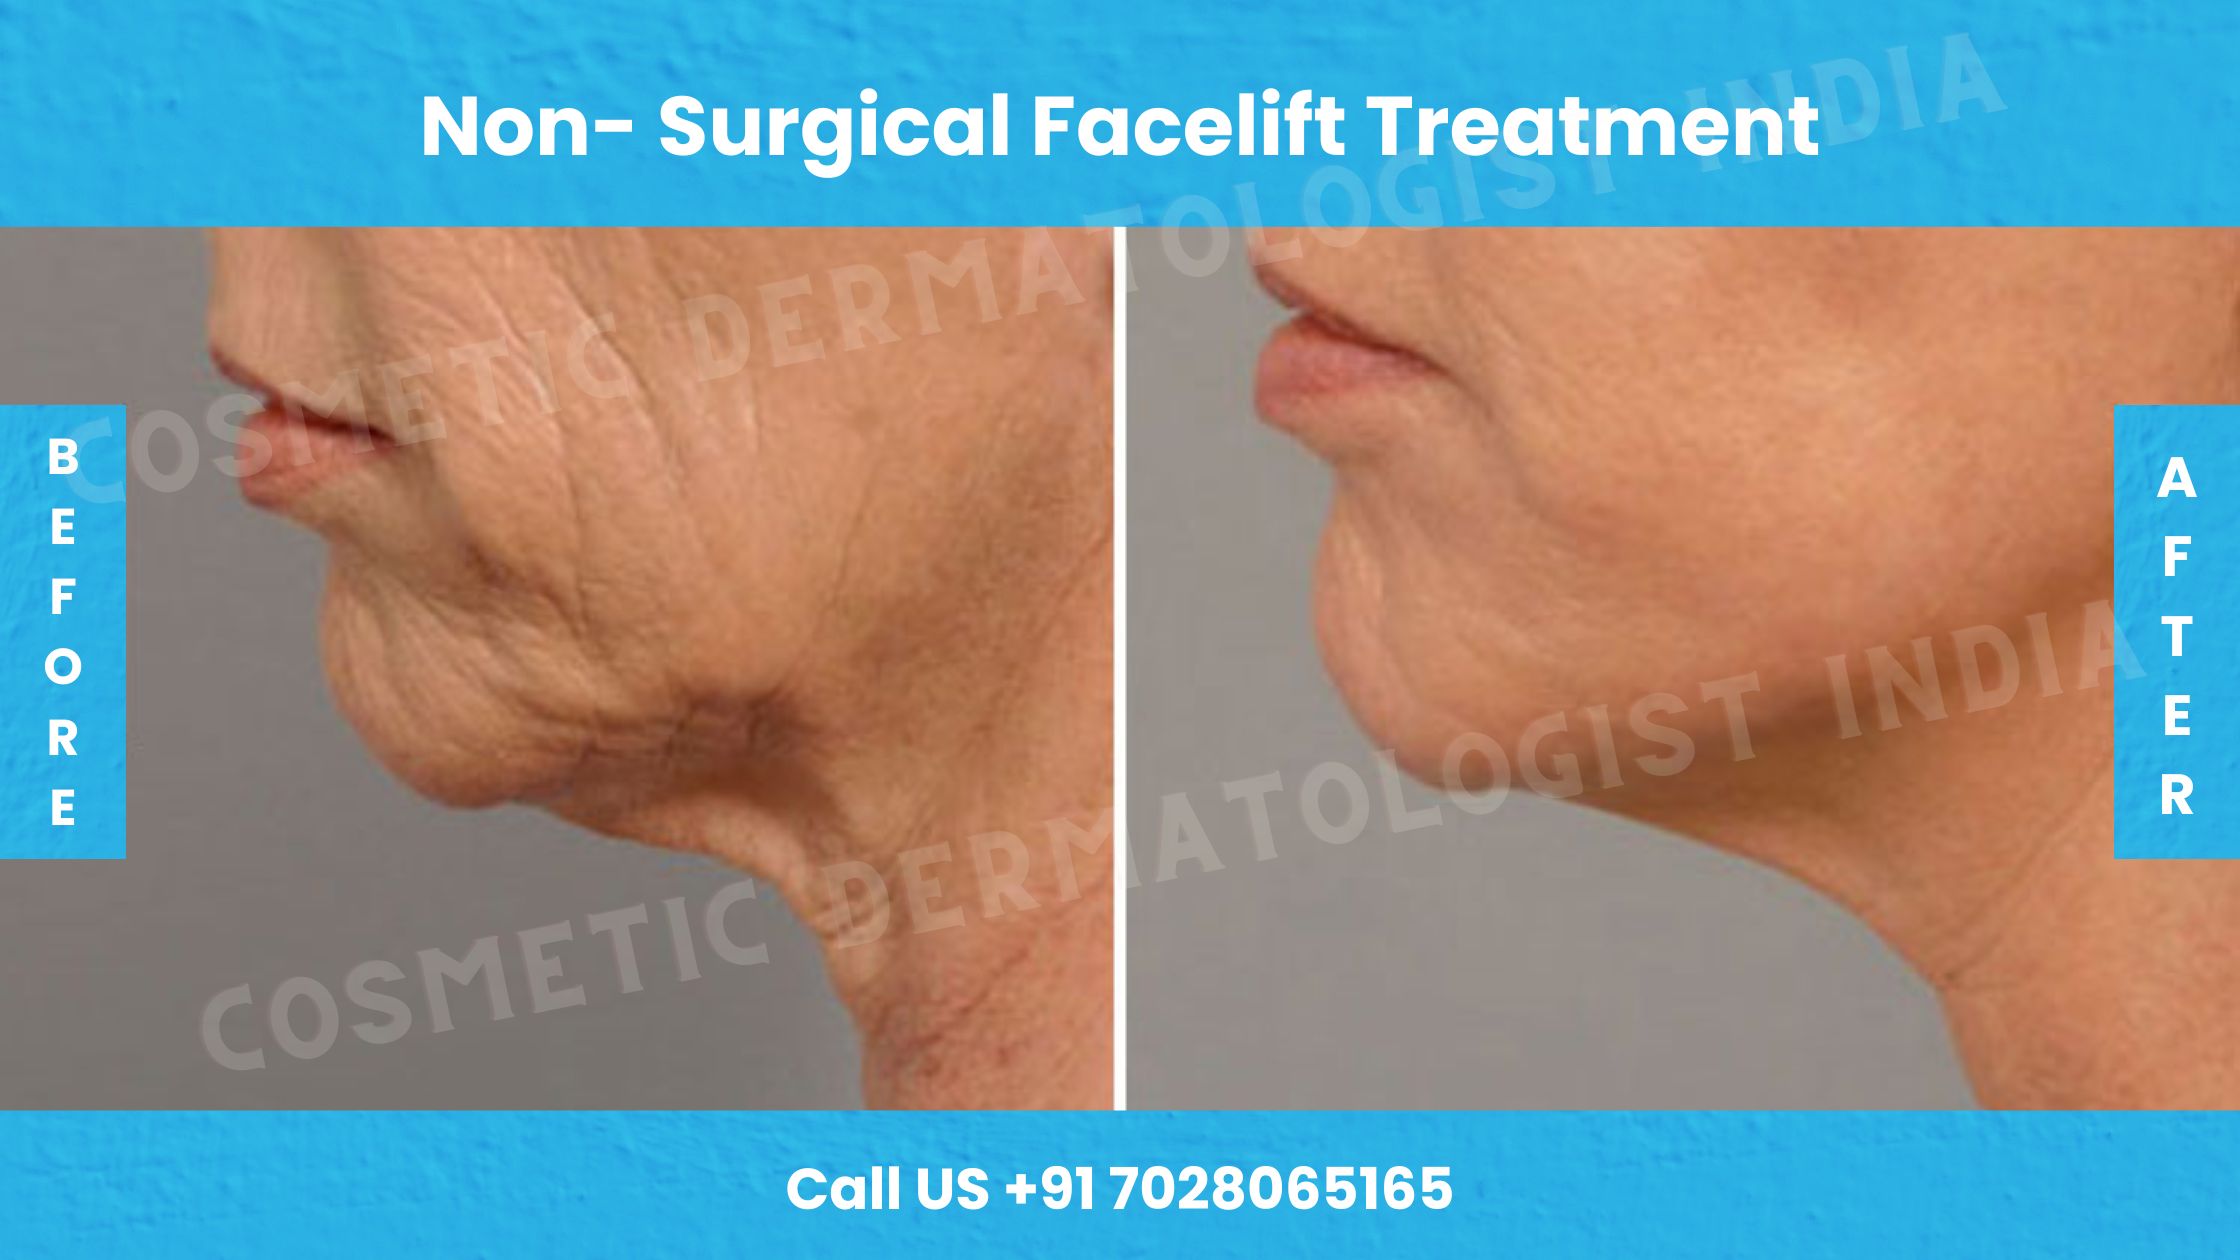 Before and After Images of Non- Surgical Facelift Treatment